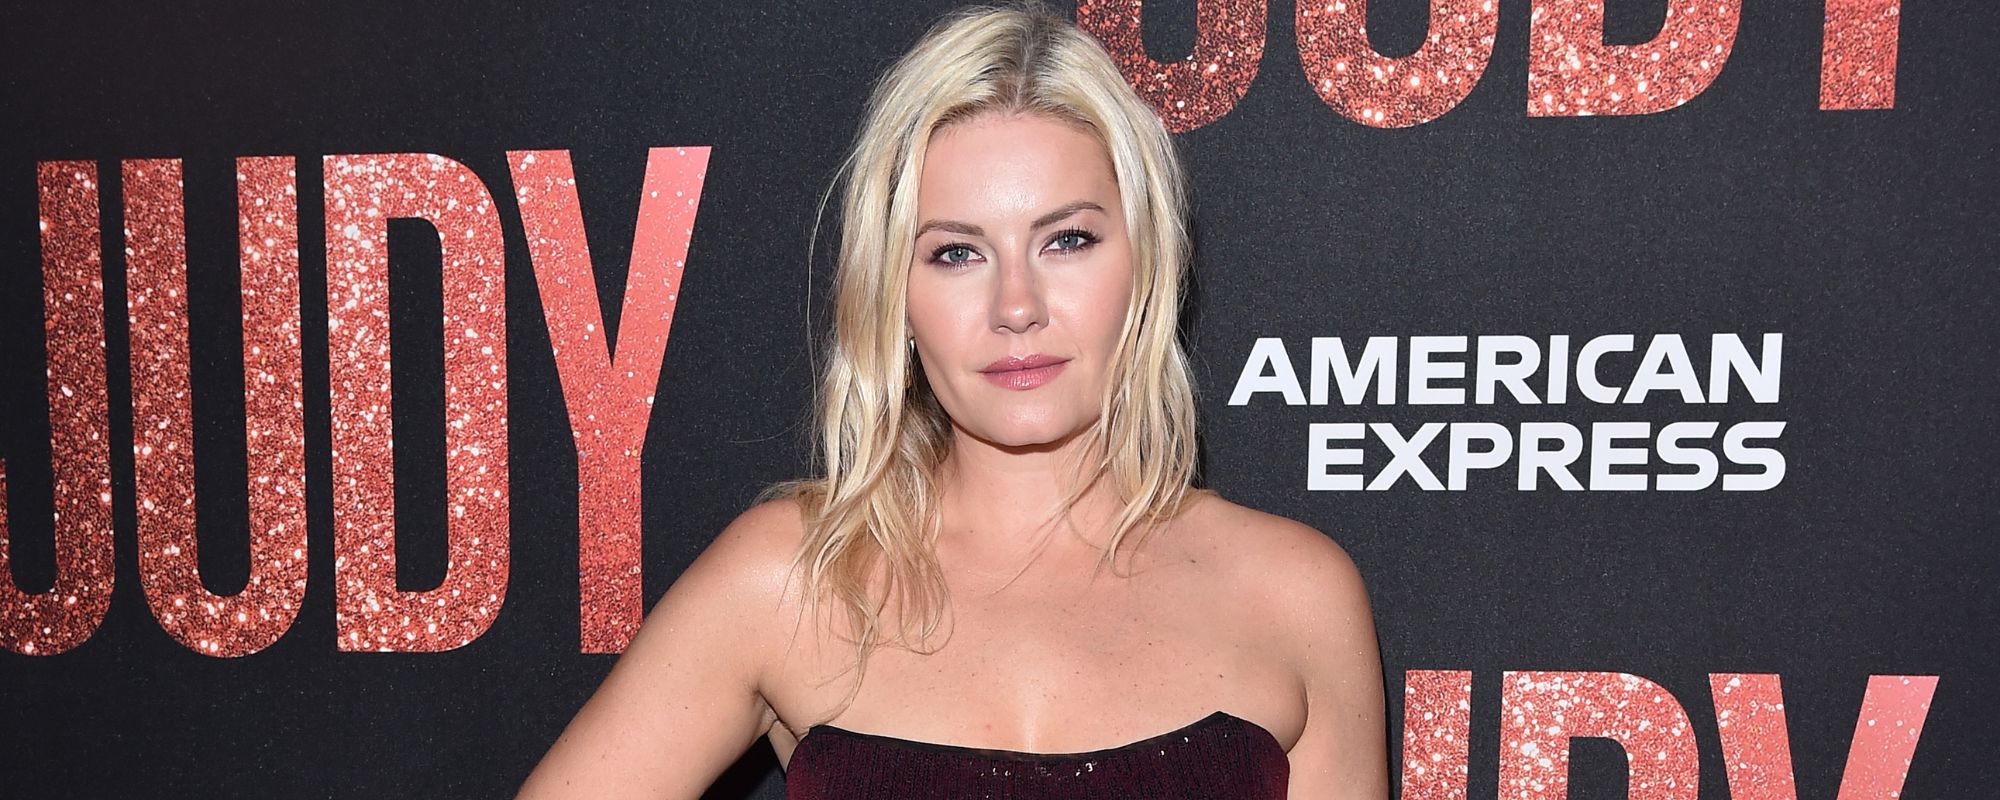 Elisha Cuthbert: I Was 'Pressured' Into Posing For Men's Magazines As A  Young Actor